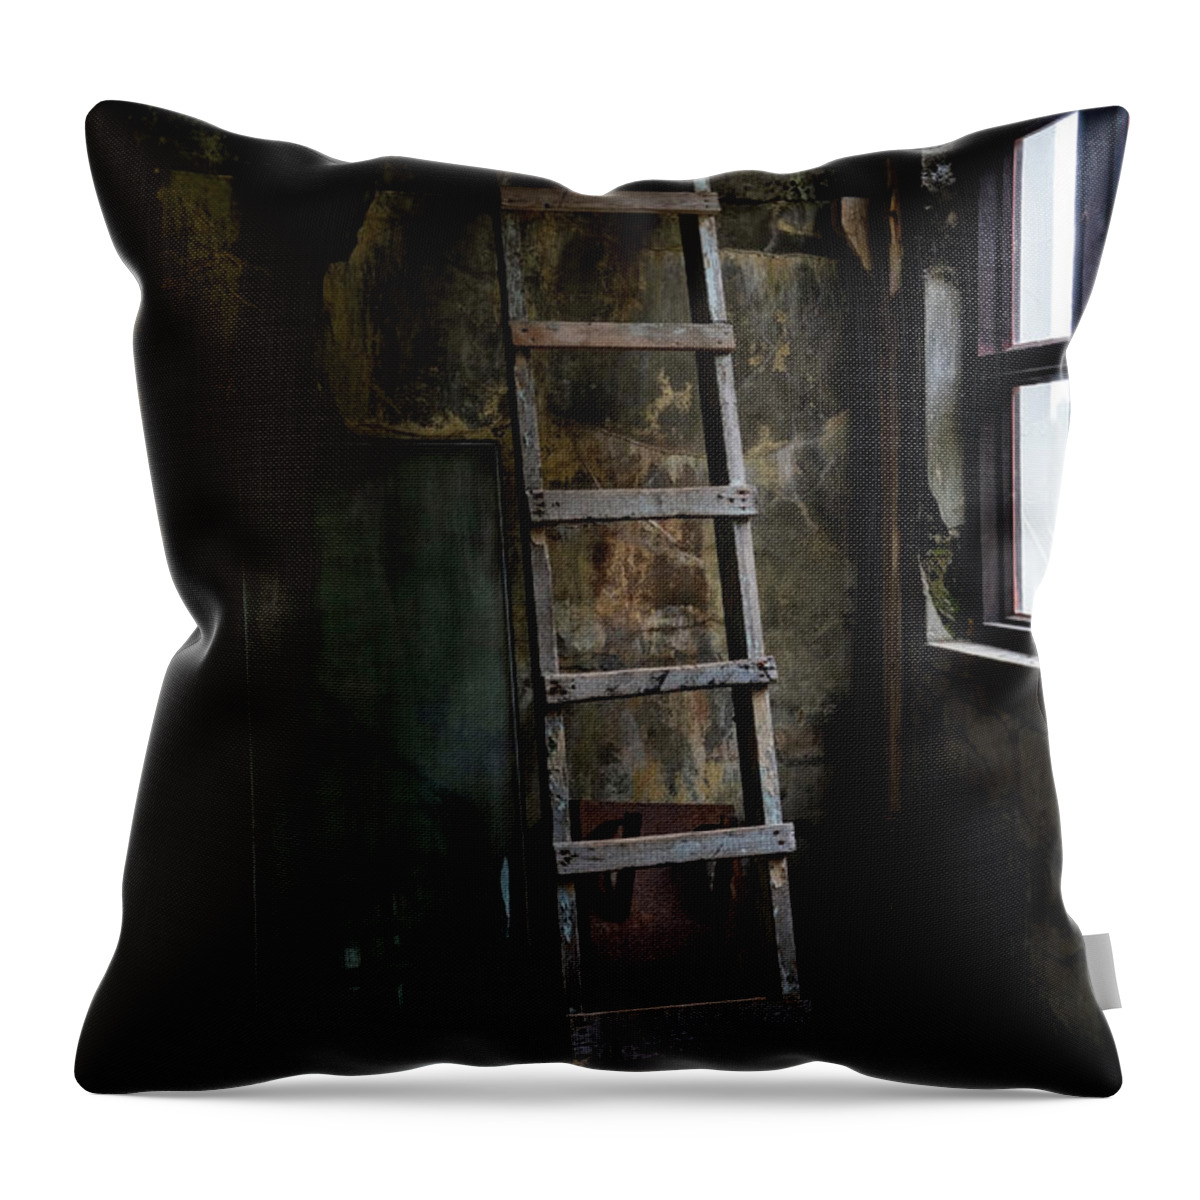 Iceland Throw Pillow featuring the photograph Cannery Ladder by Tom Singleton